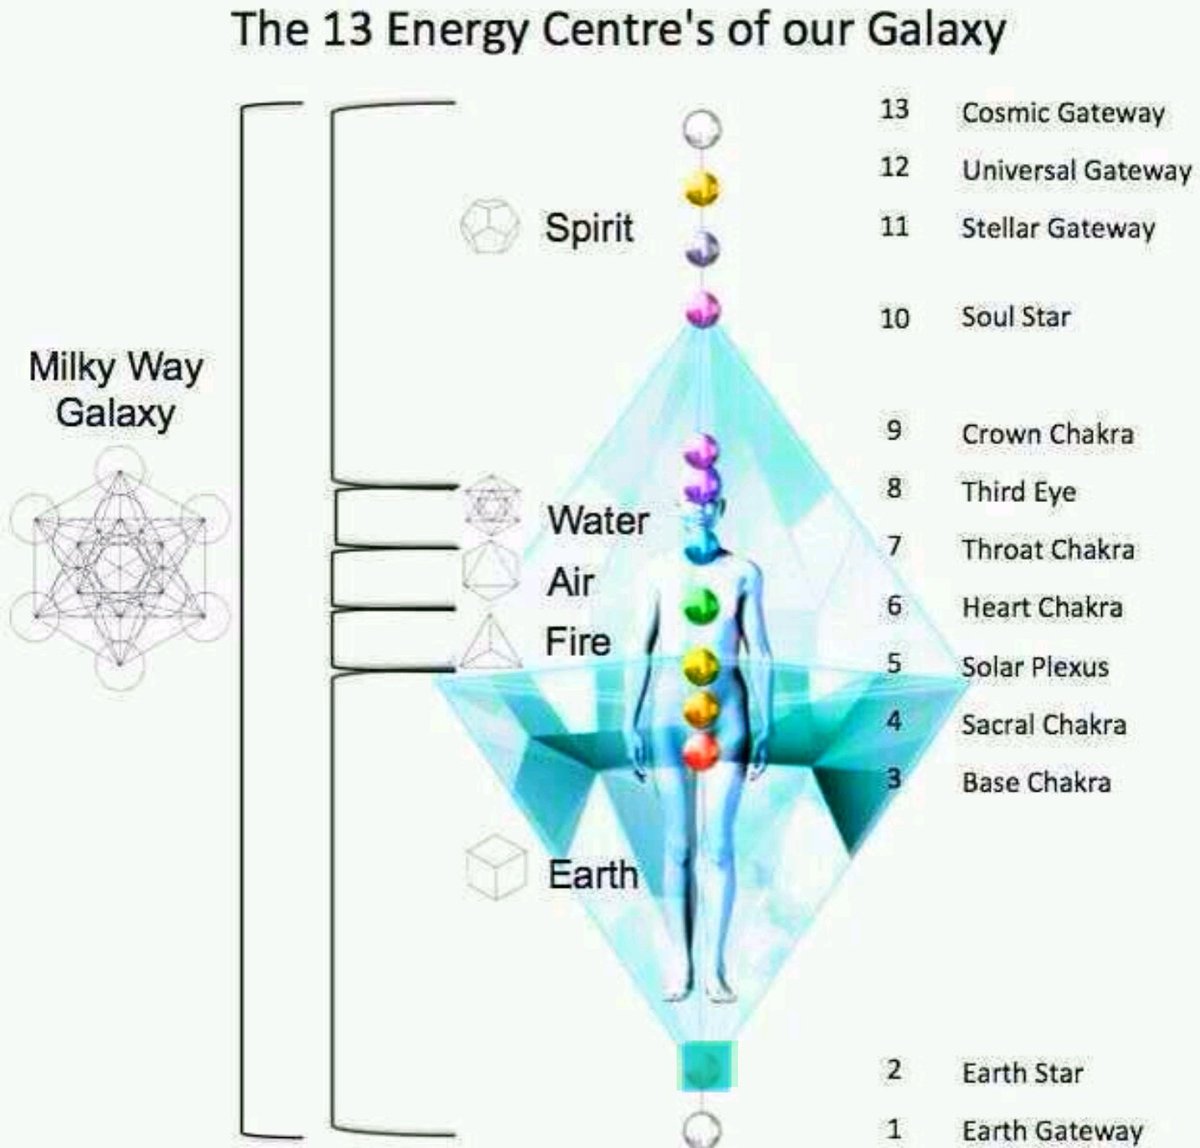 Your cells are receiving powerful plasma light for your multidimensional DNA bringing sensations of floating, disorientation, nausea, upset stomach, headaches. The body needs oxygen, breathwork, H20 for water, grounding your earth star chakra to stabilize your pillar of light!